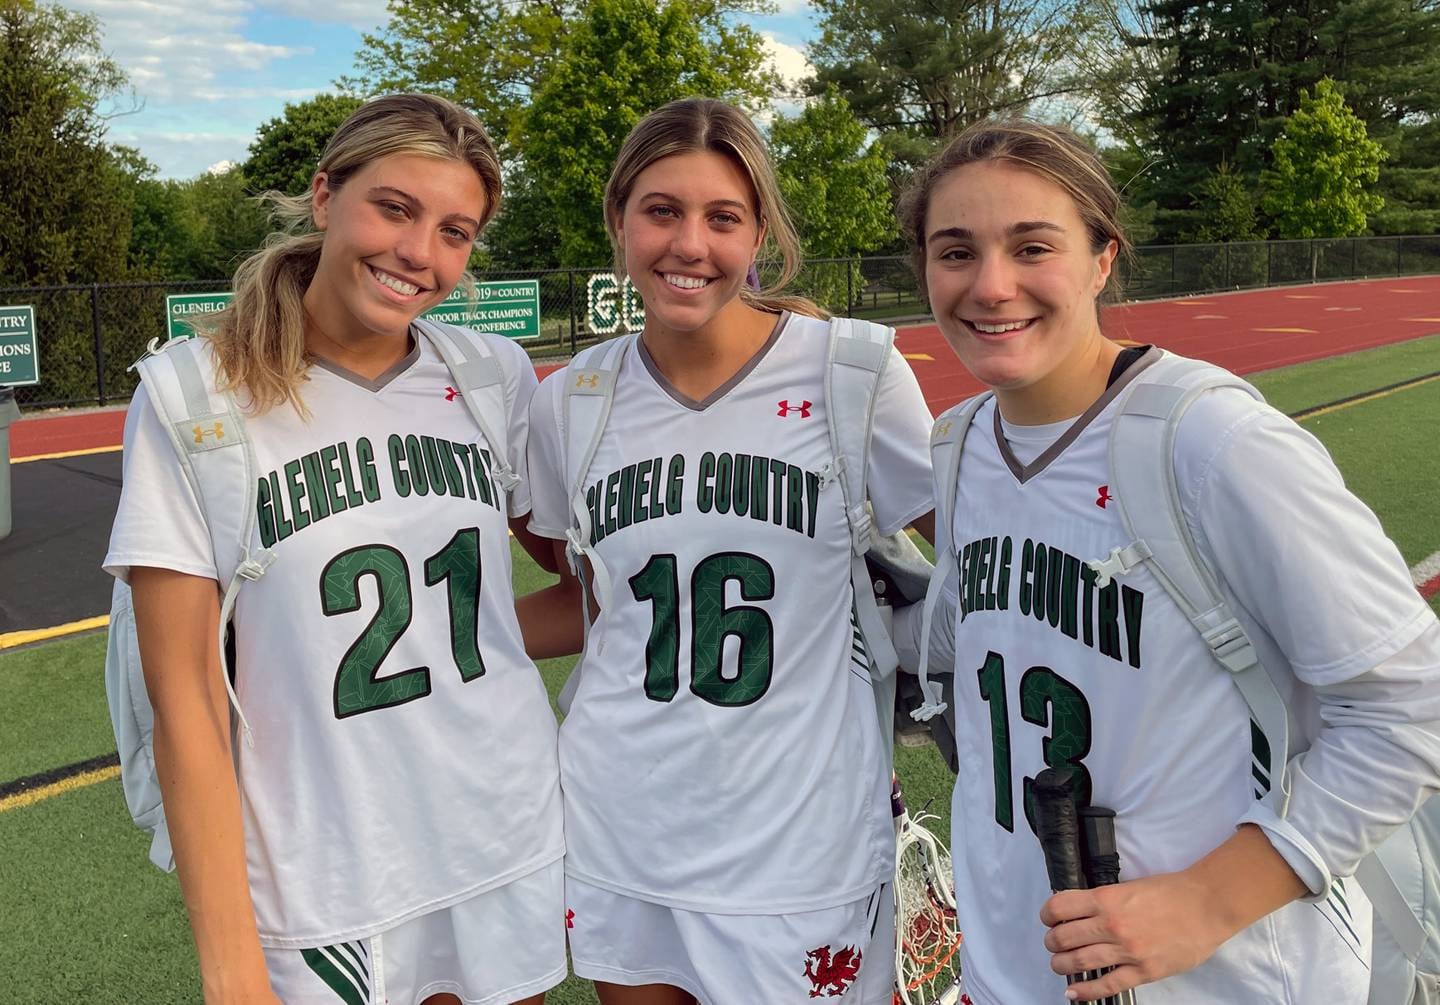 Twins Regan Bryne (21) and Blair Byrne (16) combined for the game-winning goal as No. 4 Glenelg Country School slipped past No. 5 Archbishop Spalding, 7-6, in overtime in the IAAM A Conference quarterfinals Friday afternoon. Goalie Natalie Eastwood (13) had 14 saves. The Dragons advance to meet No. 1 McDonogh in the semifinals Tuesday.